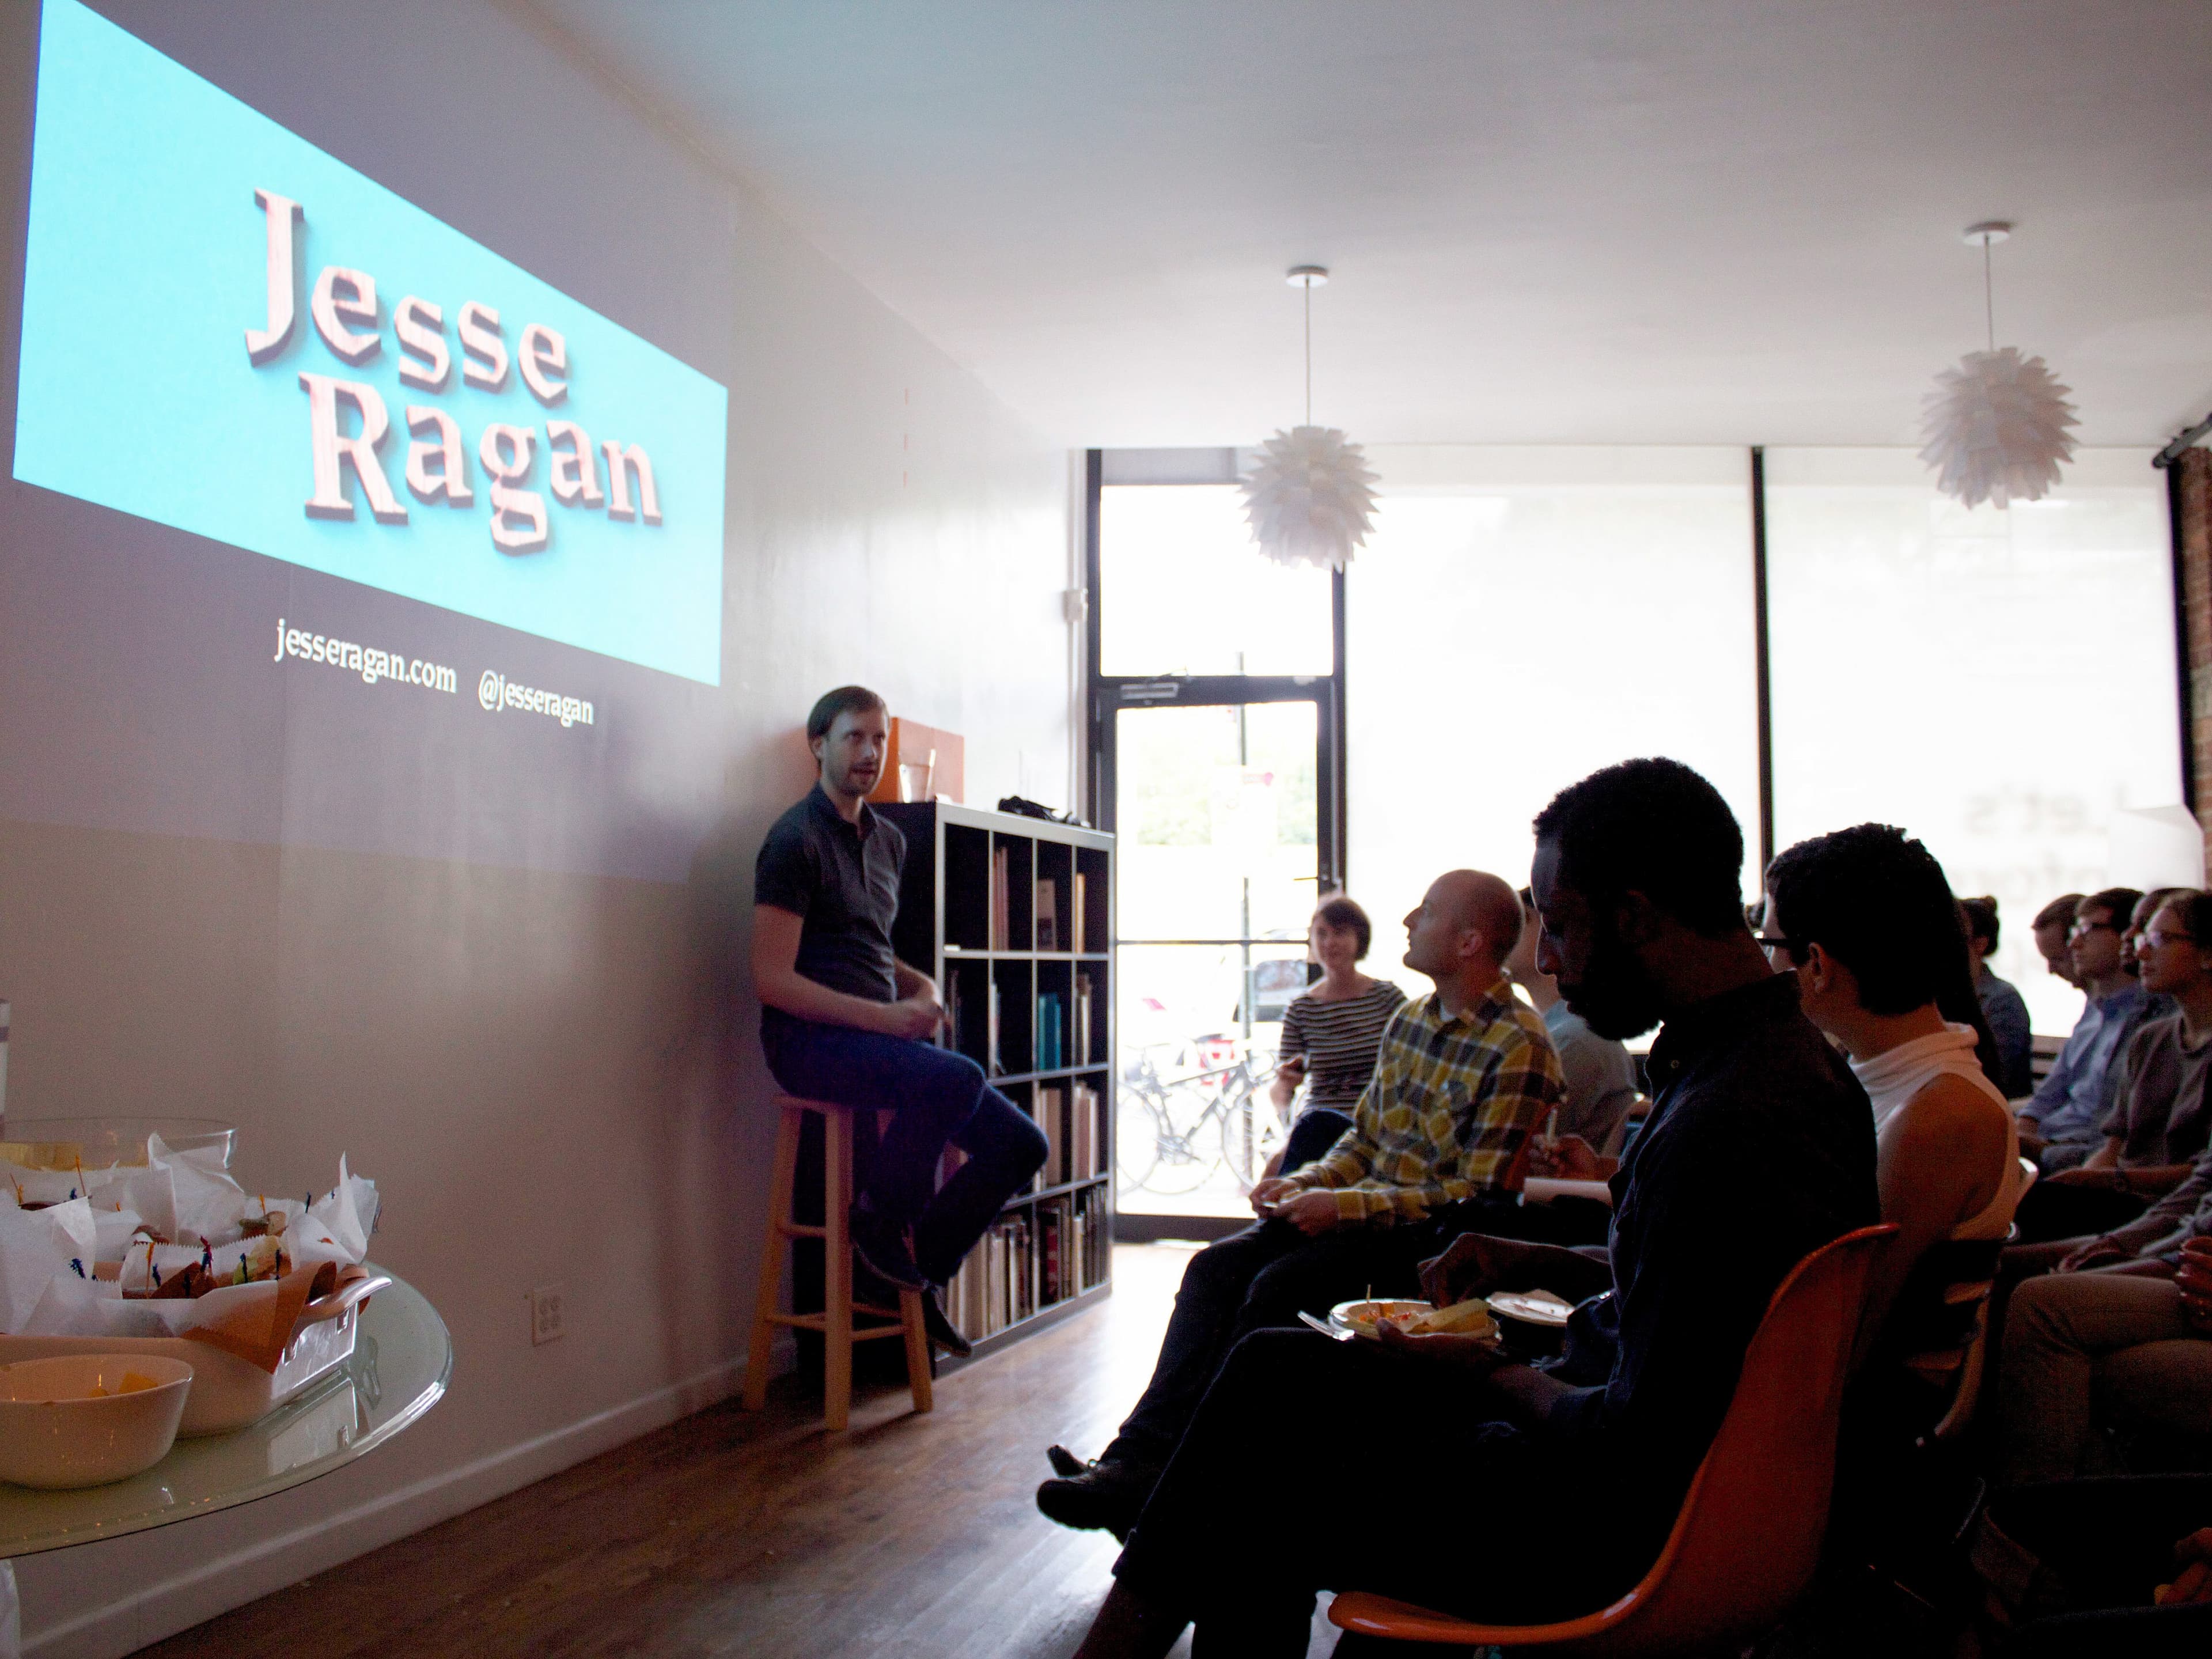 A man sits on a stool in front of a small audience in a brightly lit room, giving a presentation. The screen next to him displays "Jesse Ragan" along with a web address and a Twitter handle. Snacks and drinks are visible on a table to the left.